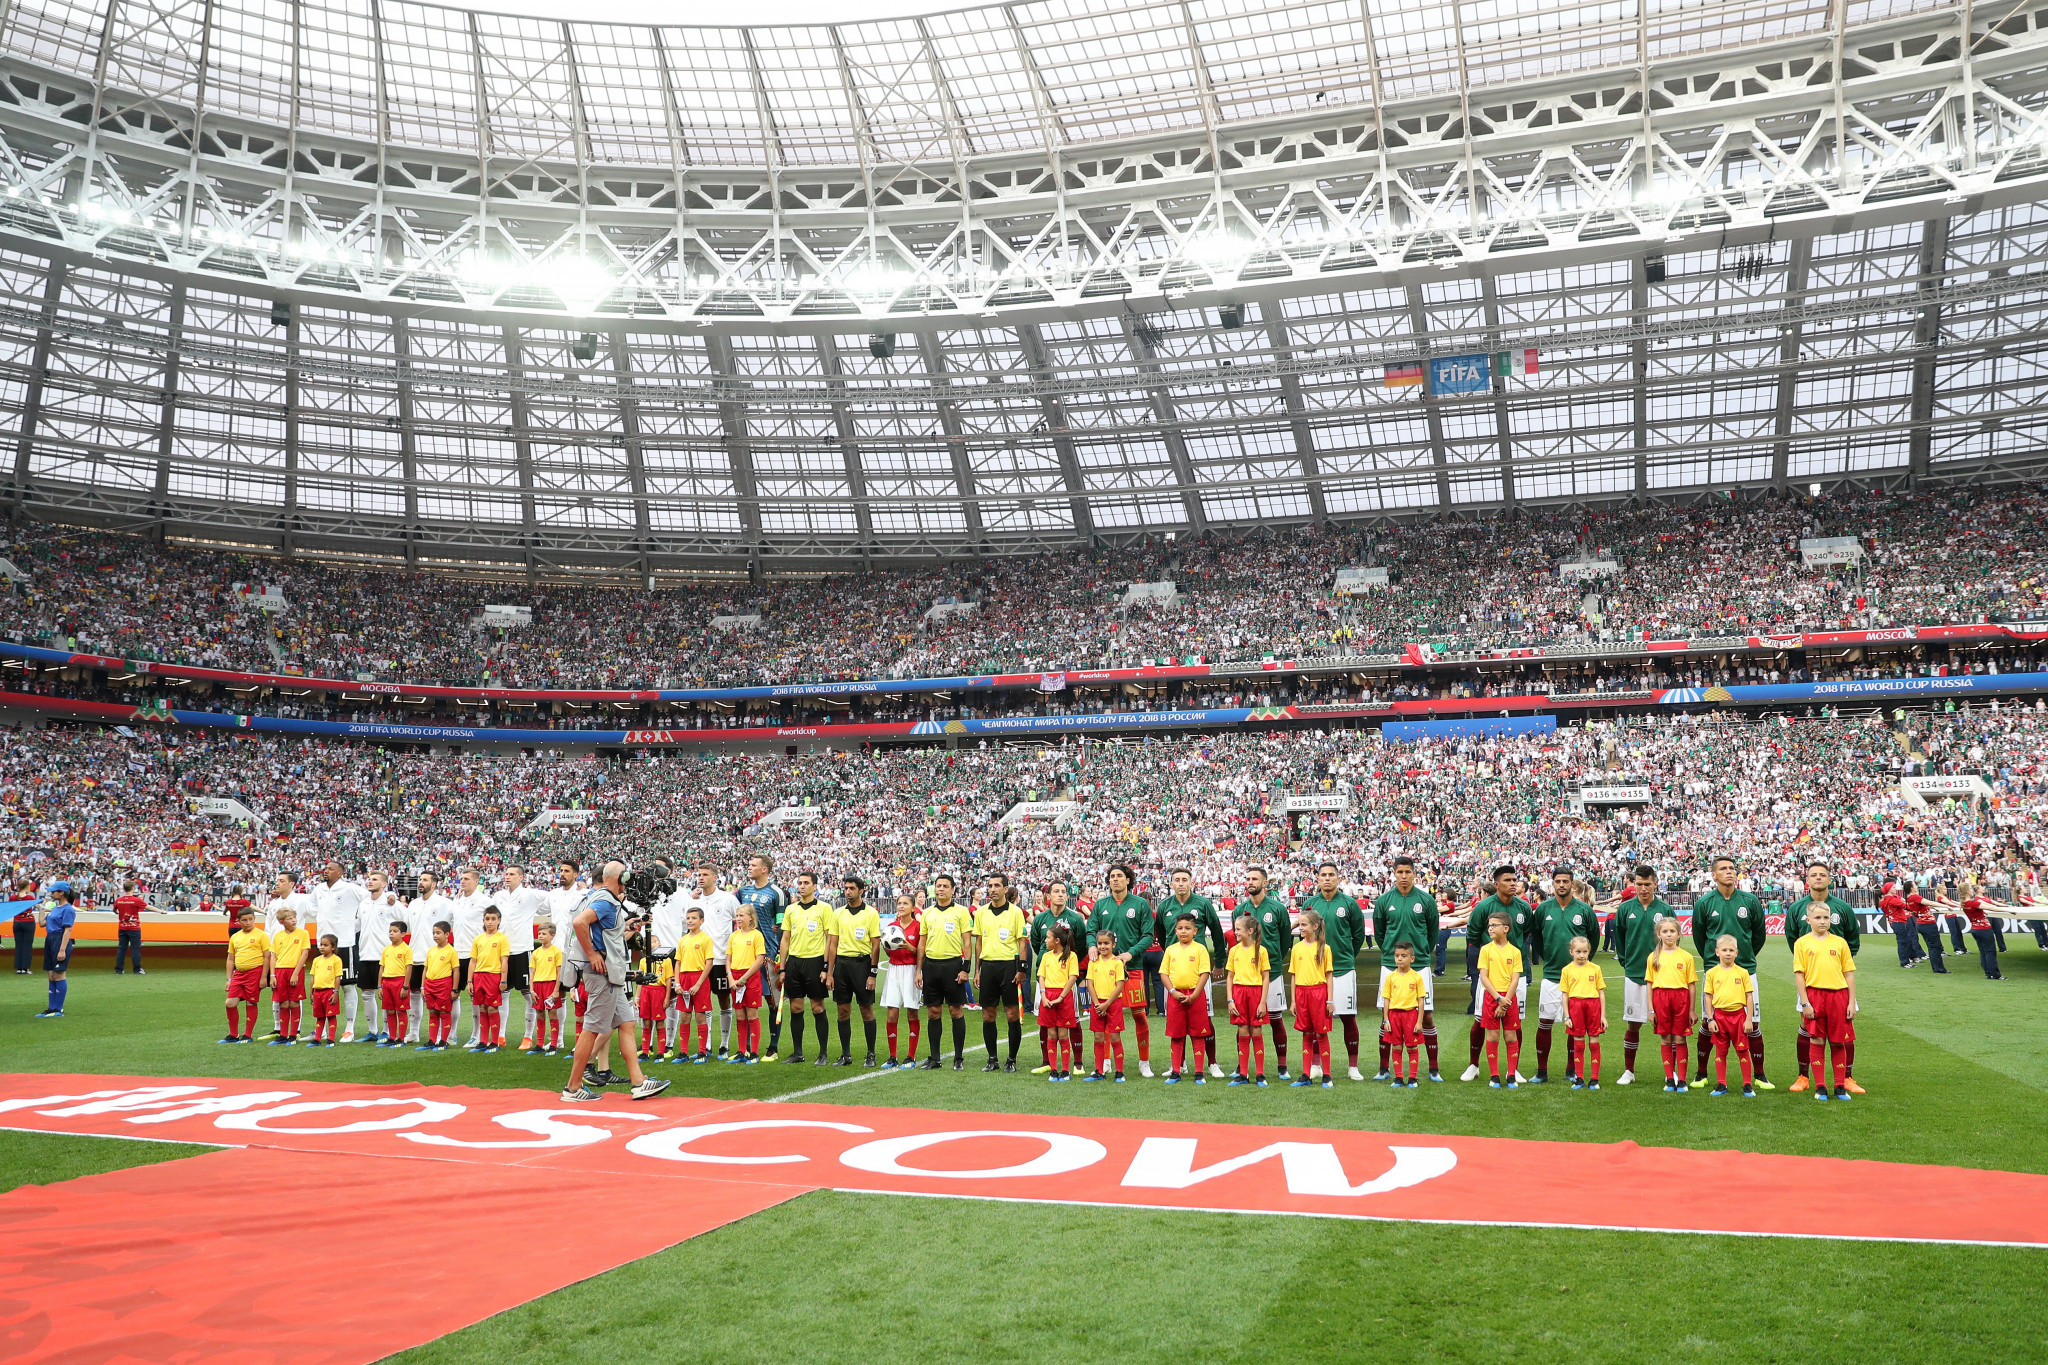 Minsk 2019 visa deal to take into account World Cup experience